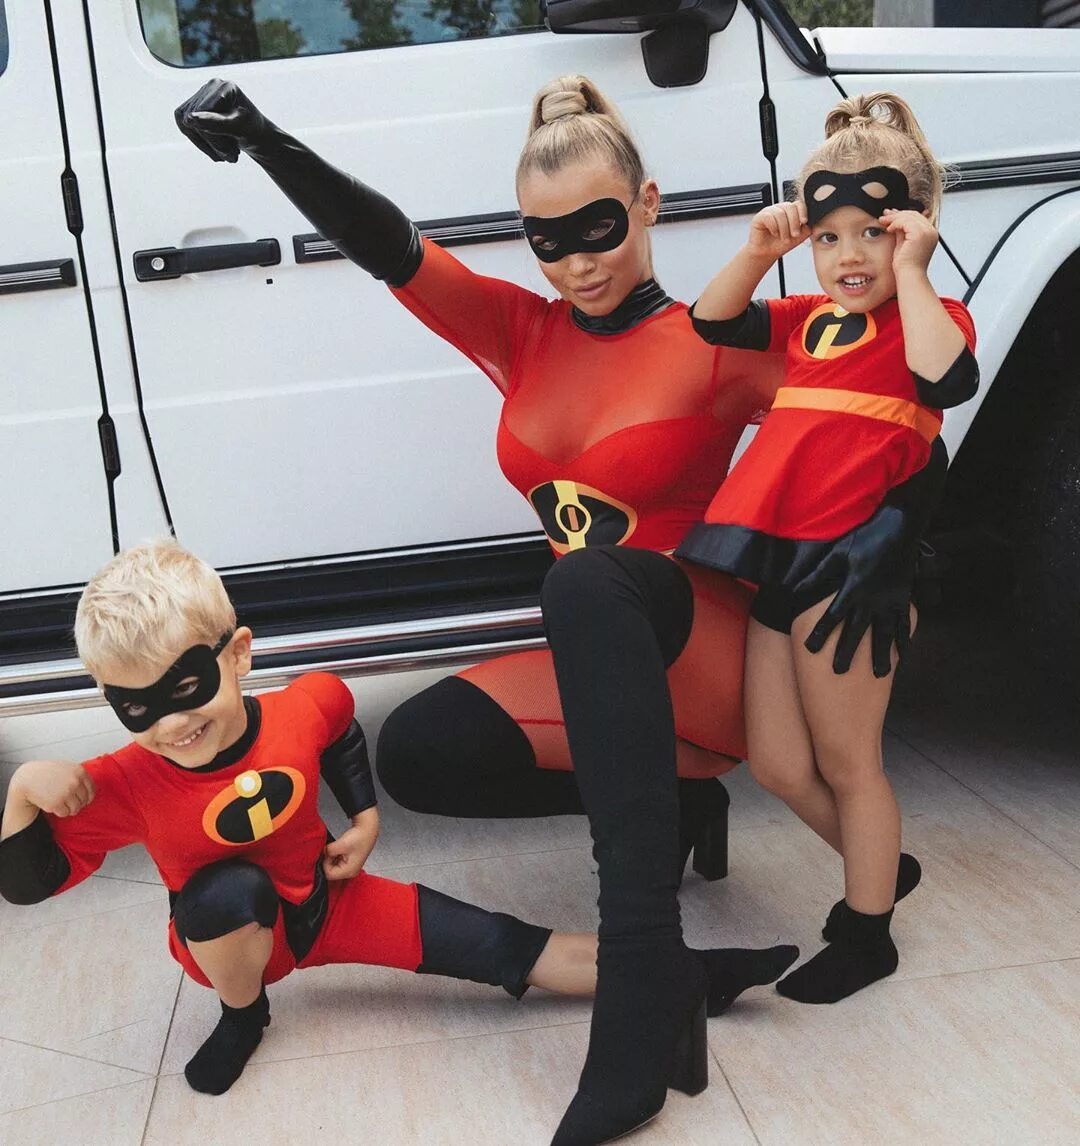 Tammy 🐚 on Instagram: "HAPPY HALLOWEEN 👻 from ms incredible & he...